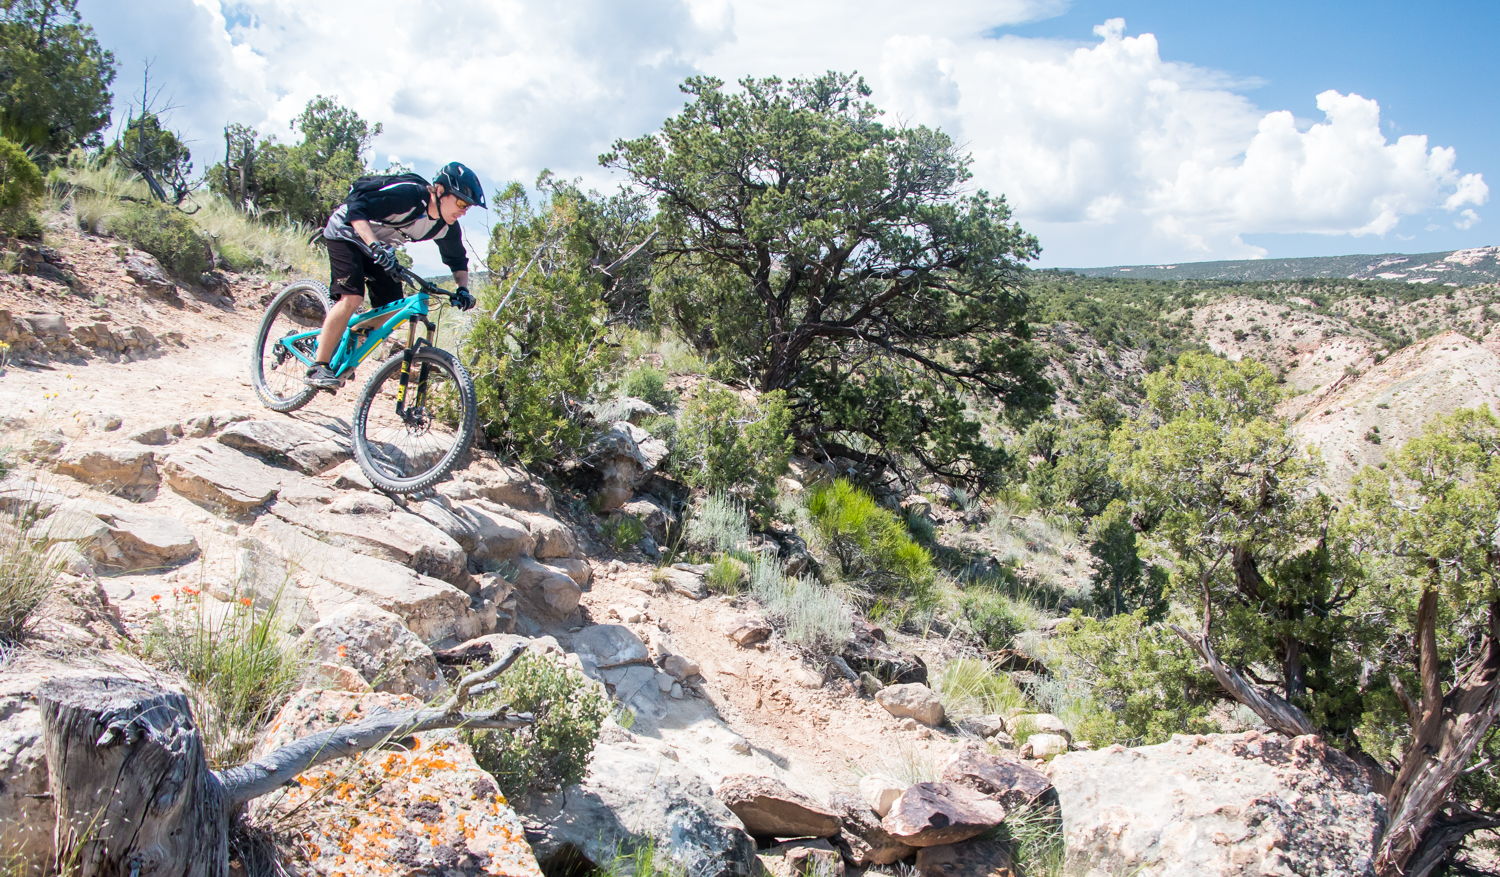 Fruita CO riding with Chasing Epic - Rider is Jeff Cayley of Worldwide Cyclery